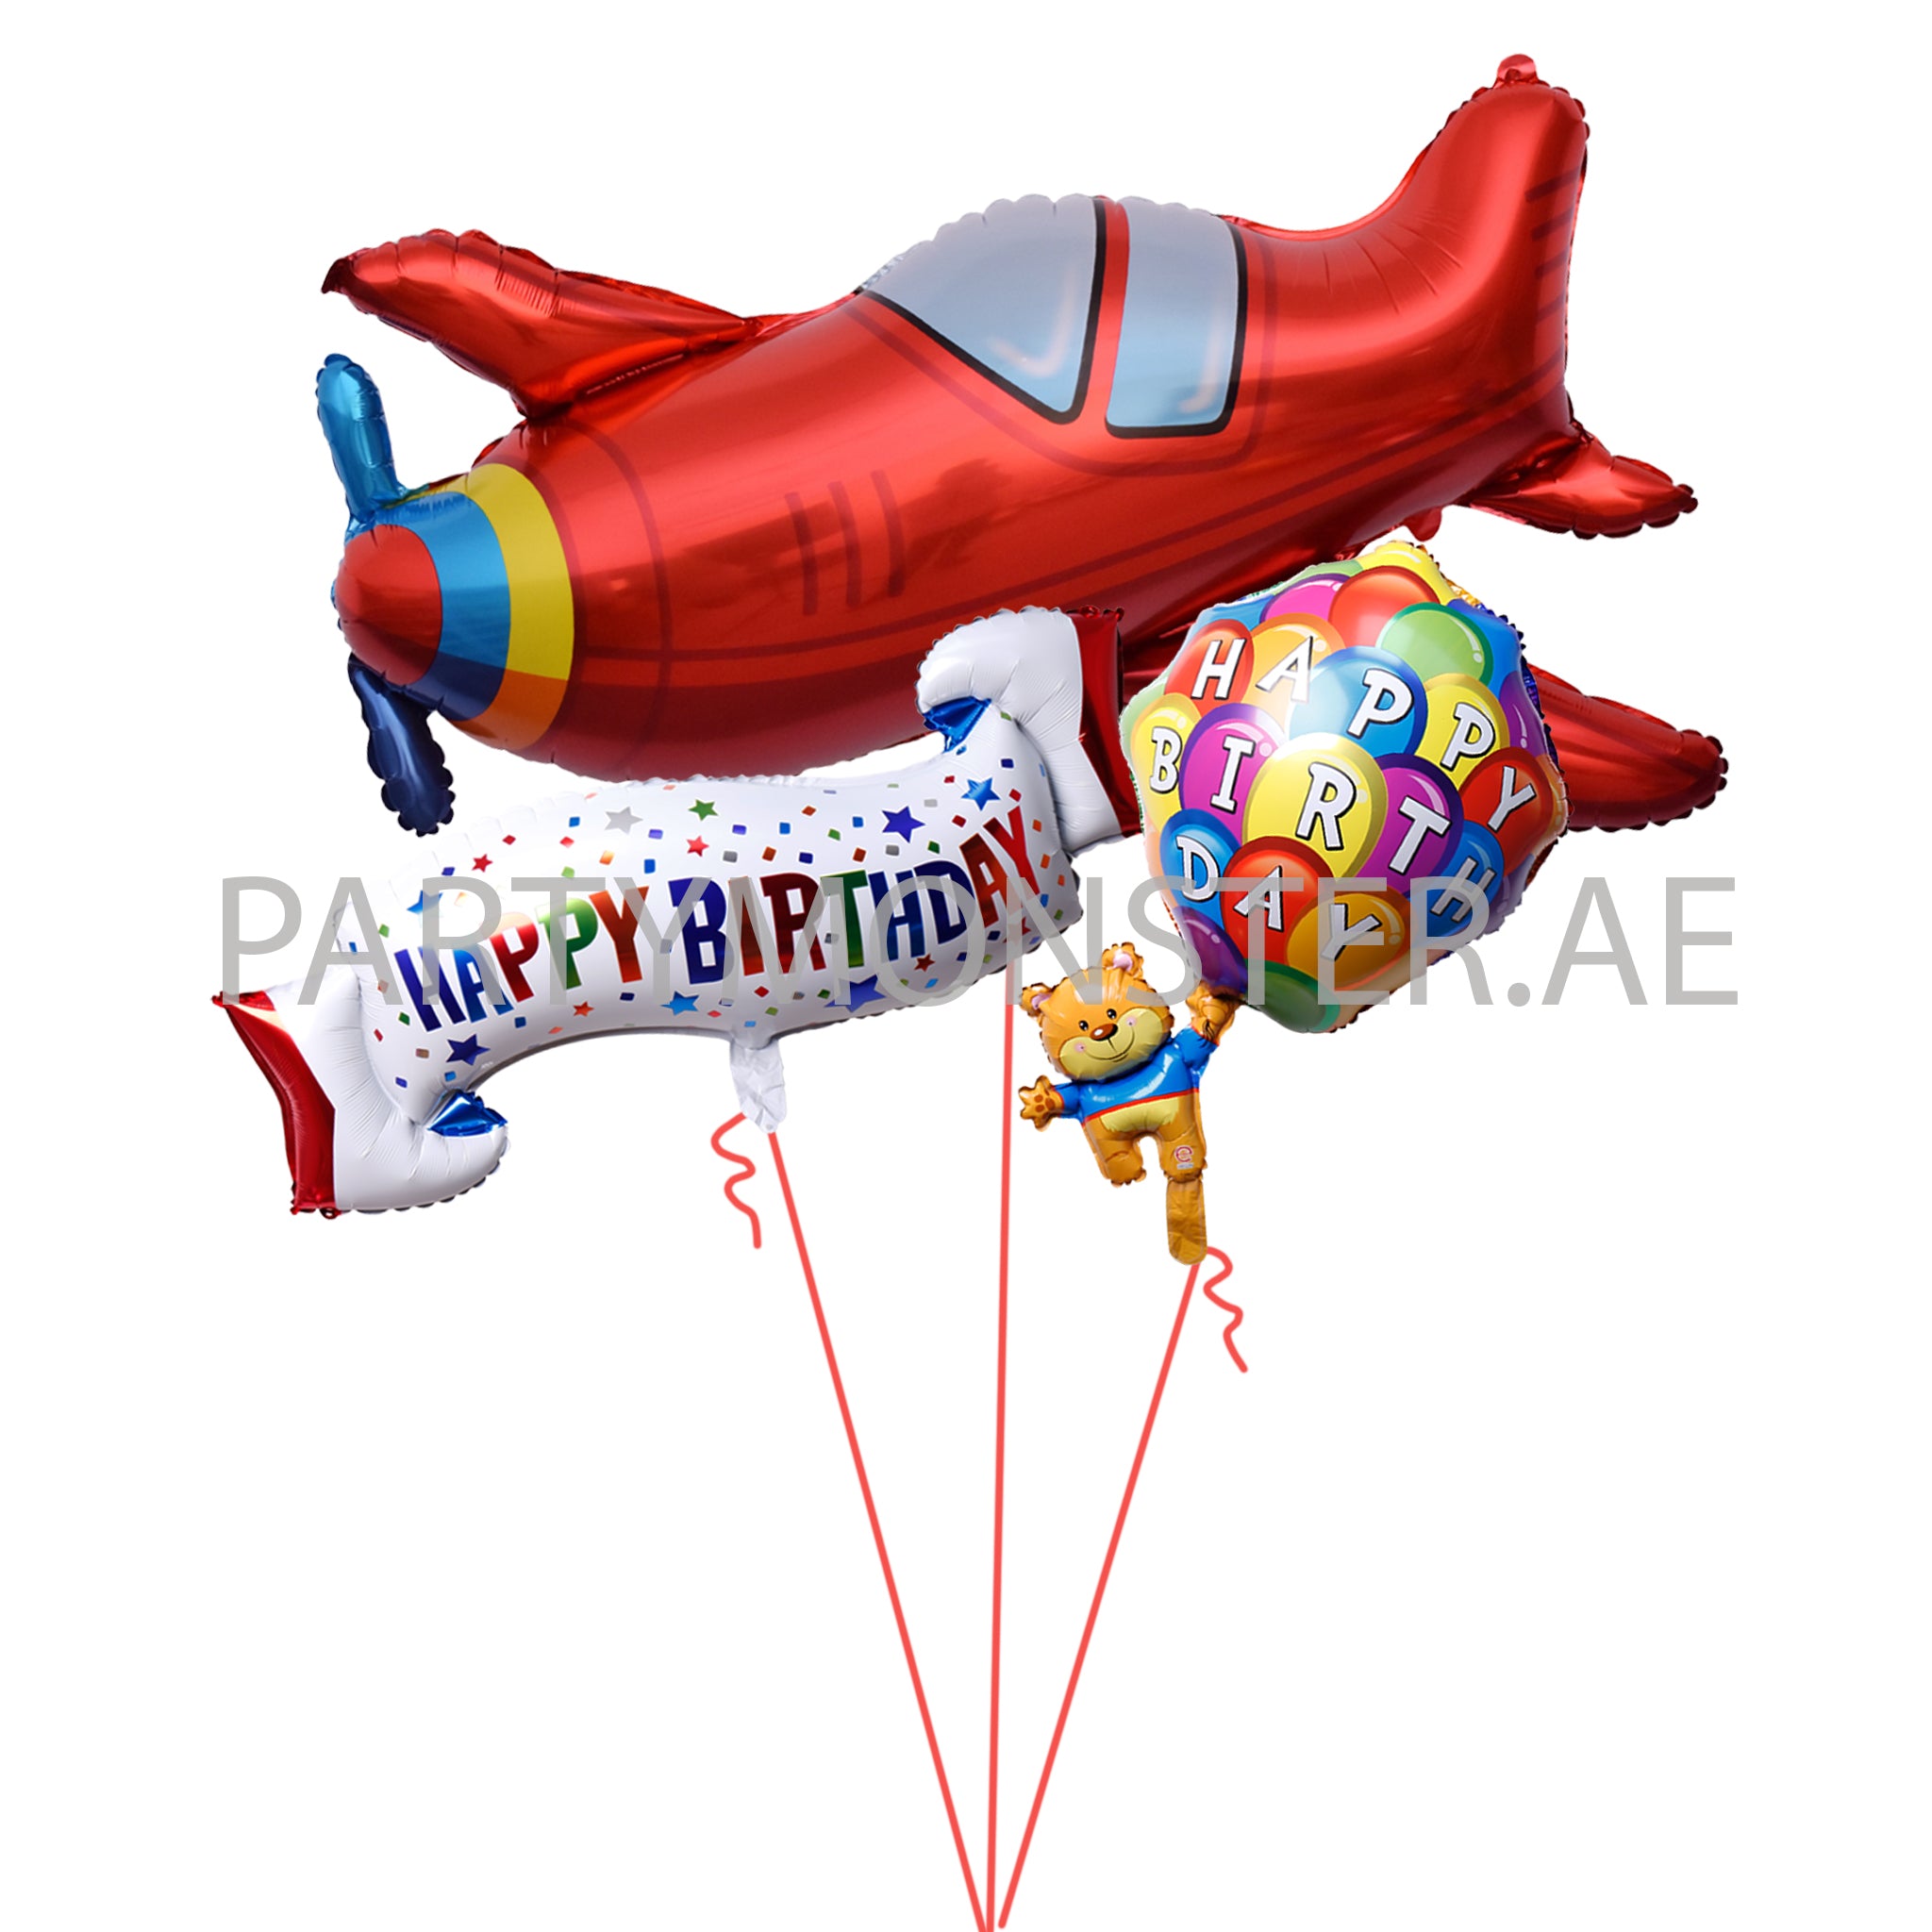 happy birthday airplane balloons delivery in Dubai